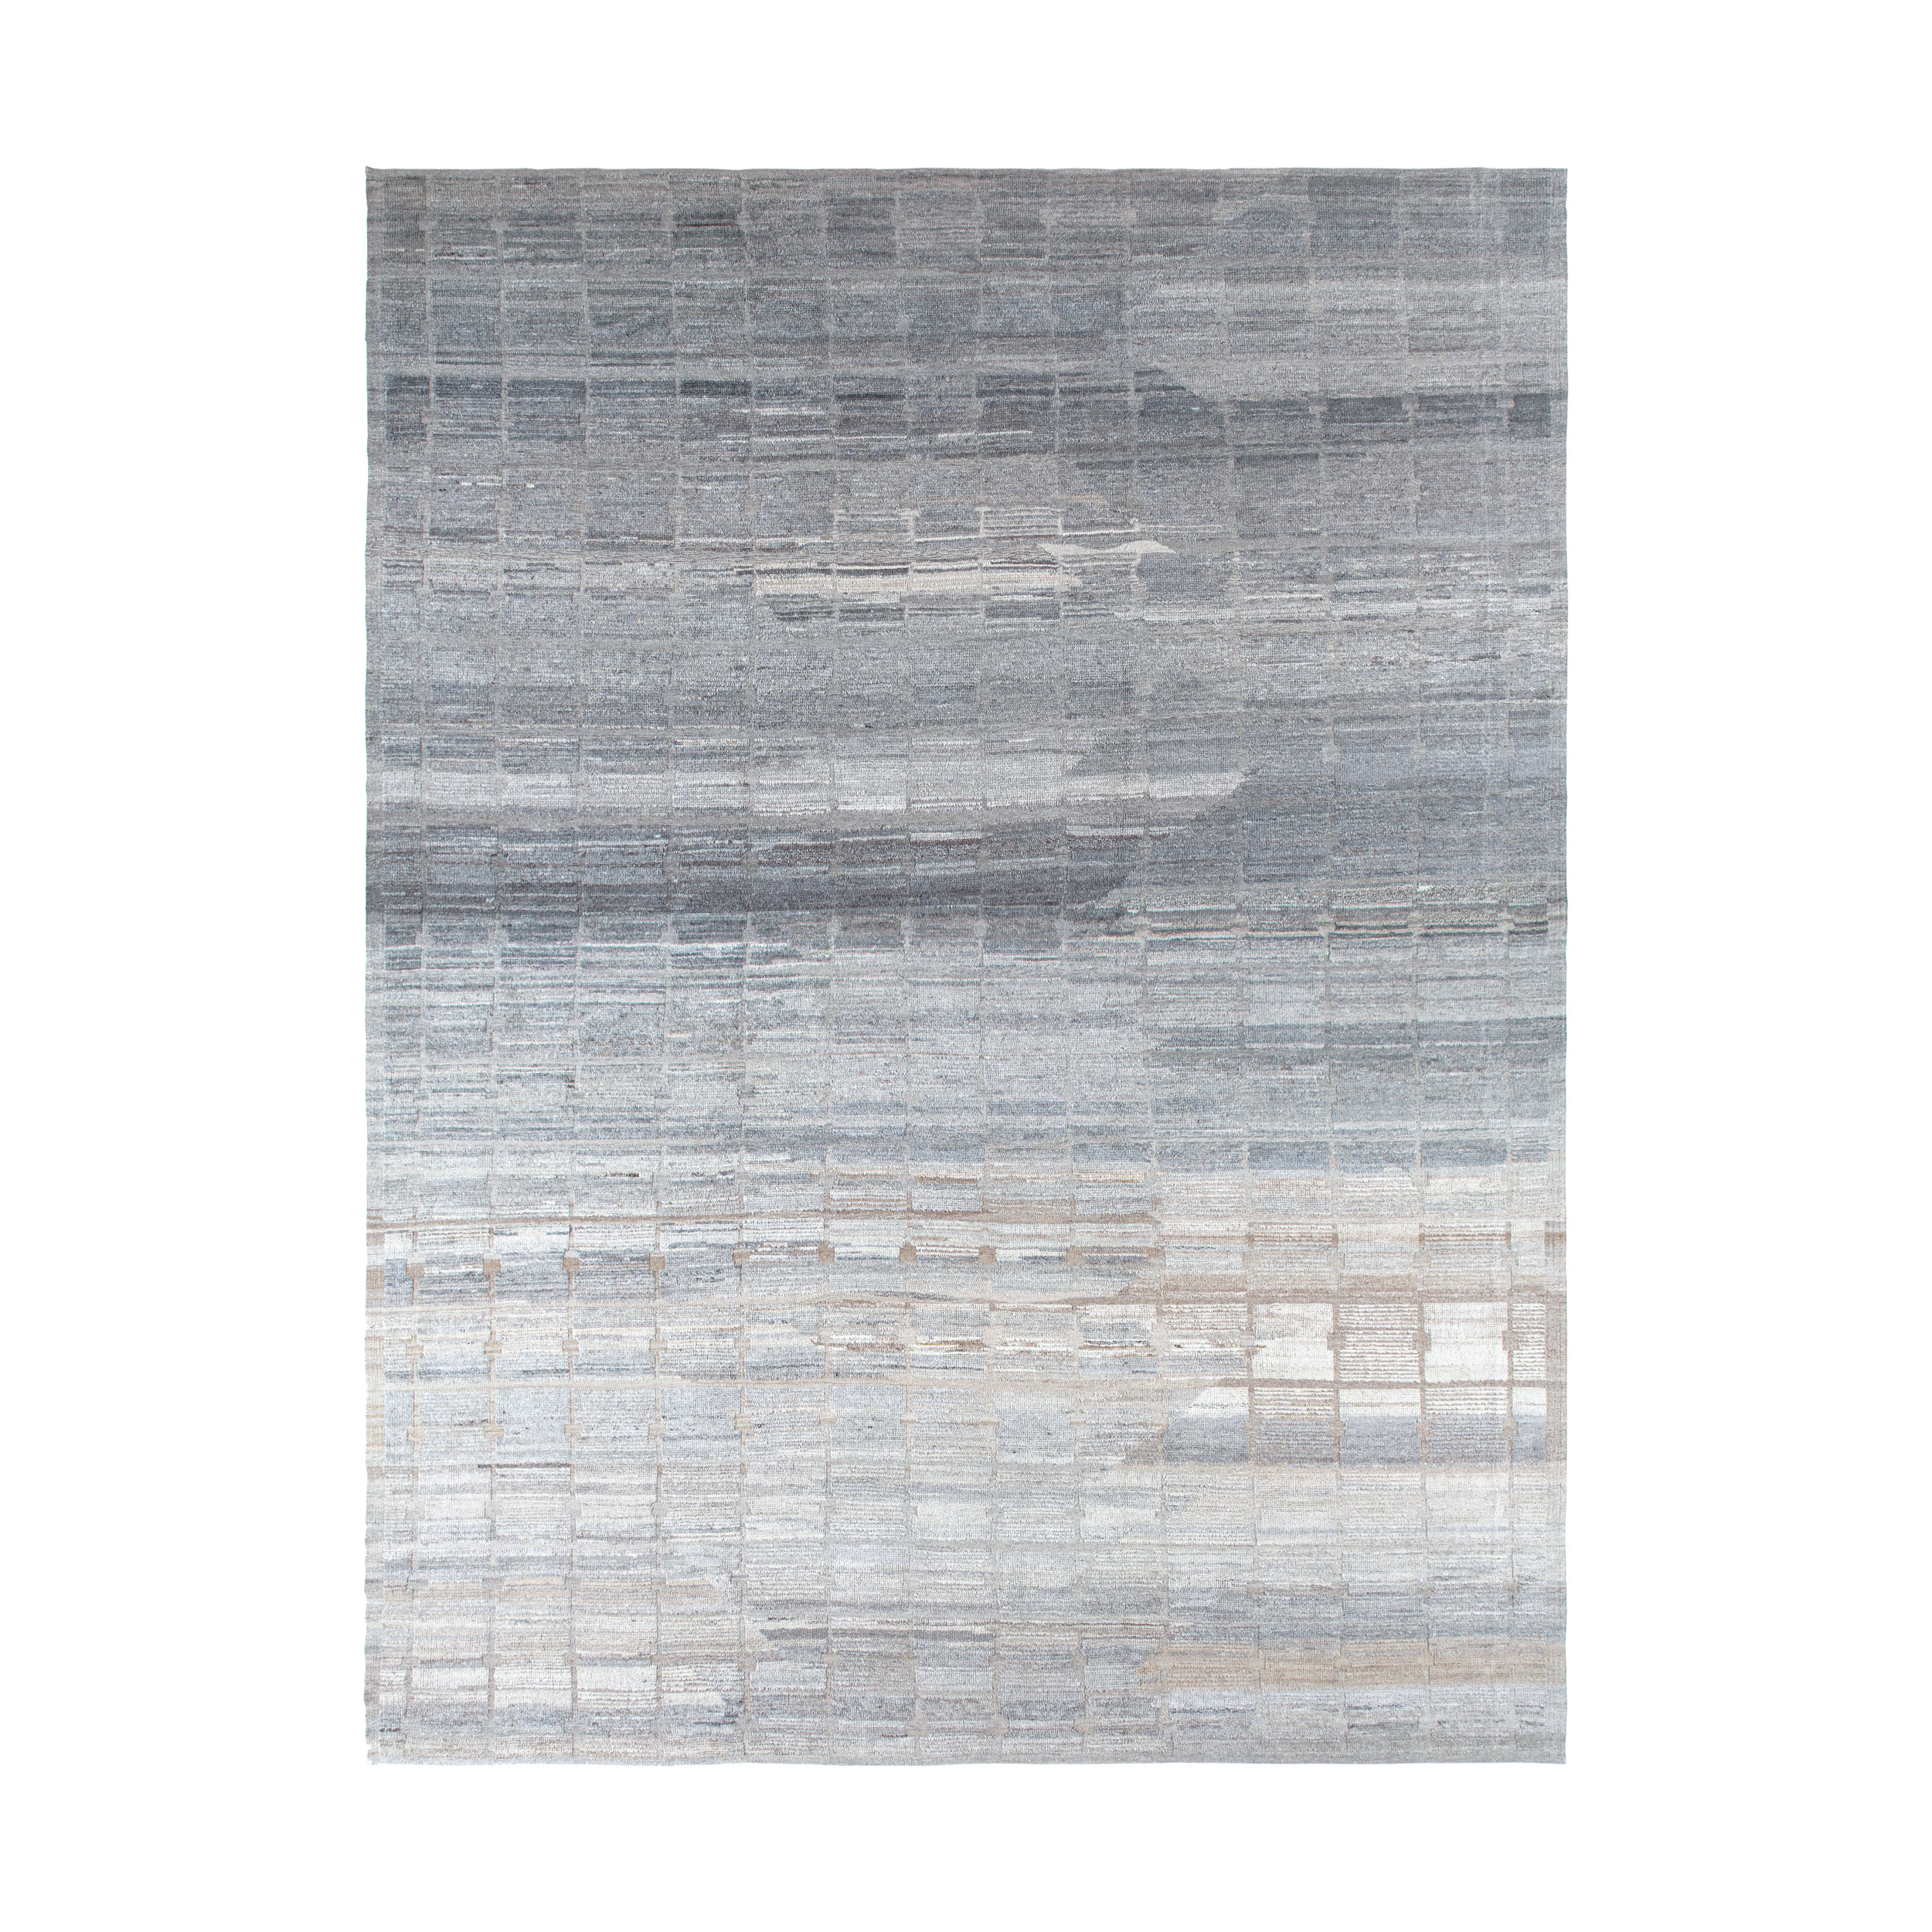 African rug that is hand-knotted from naturally dyed wool with subtle silk accents. 